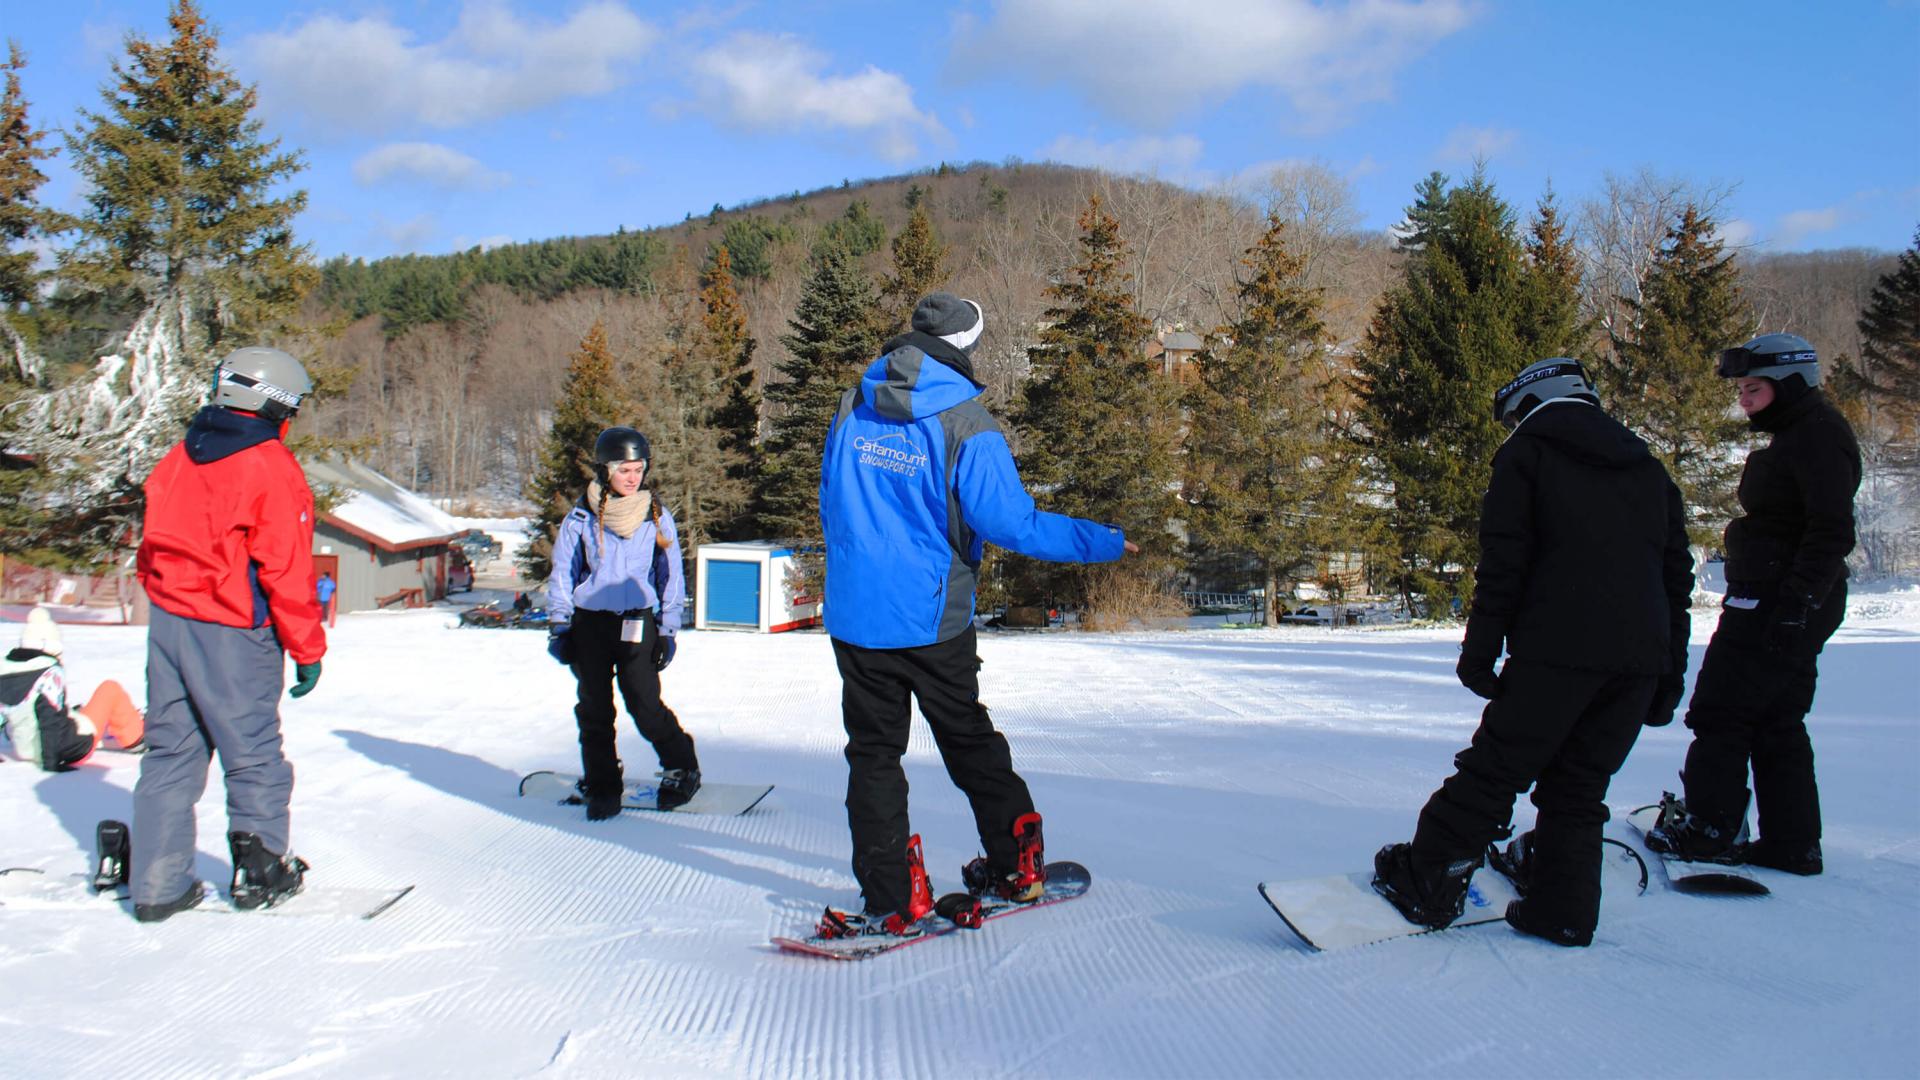 Snowboard instructor giving lessons at Catamount Resort